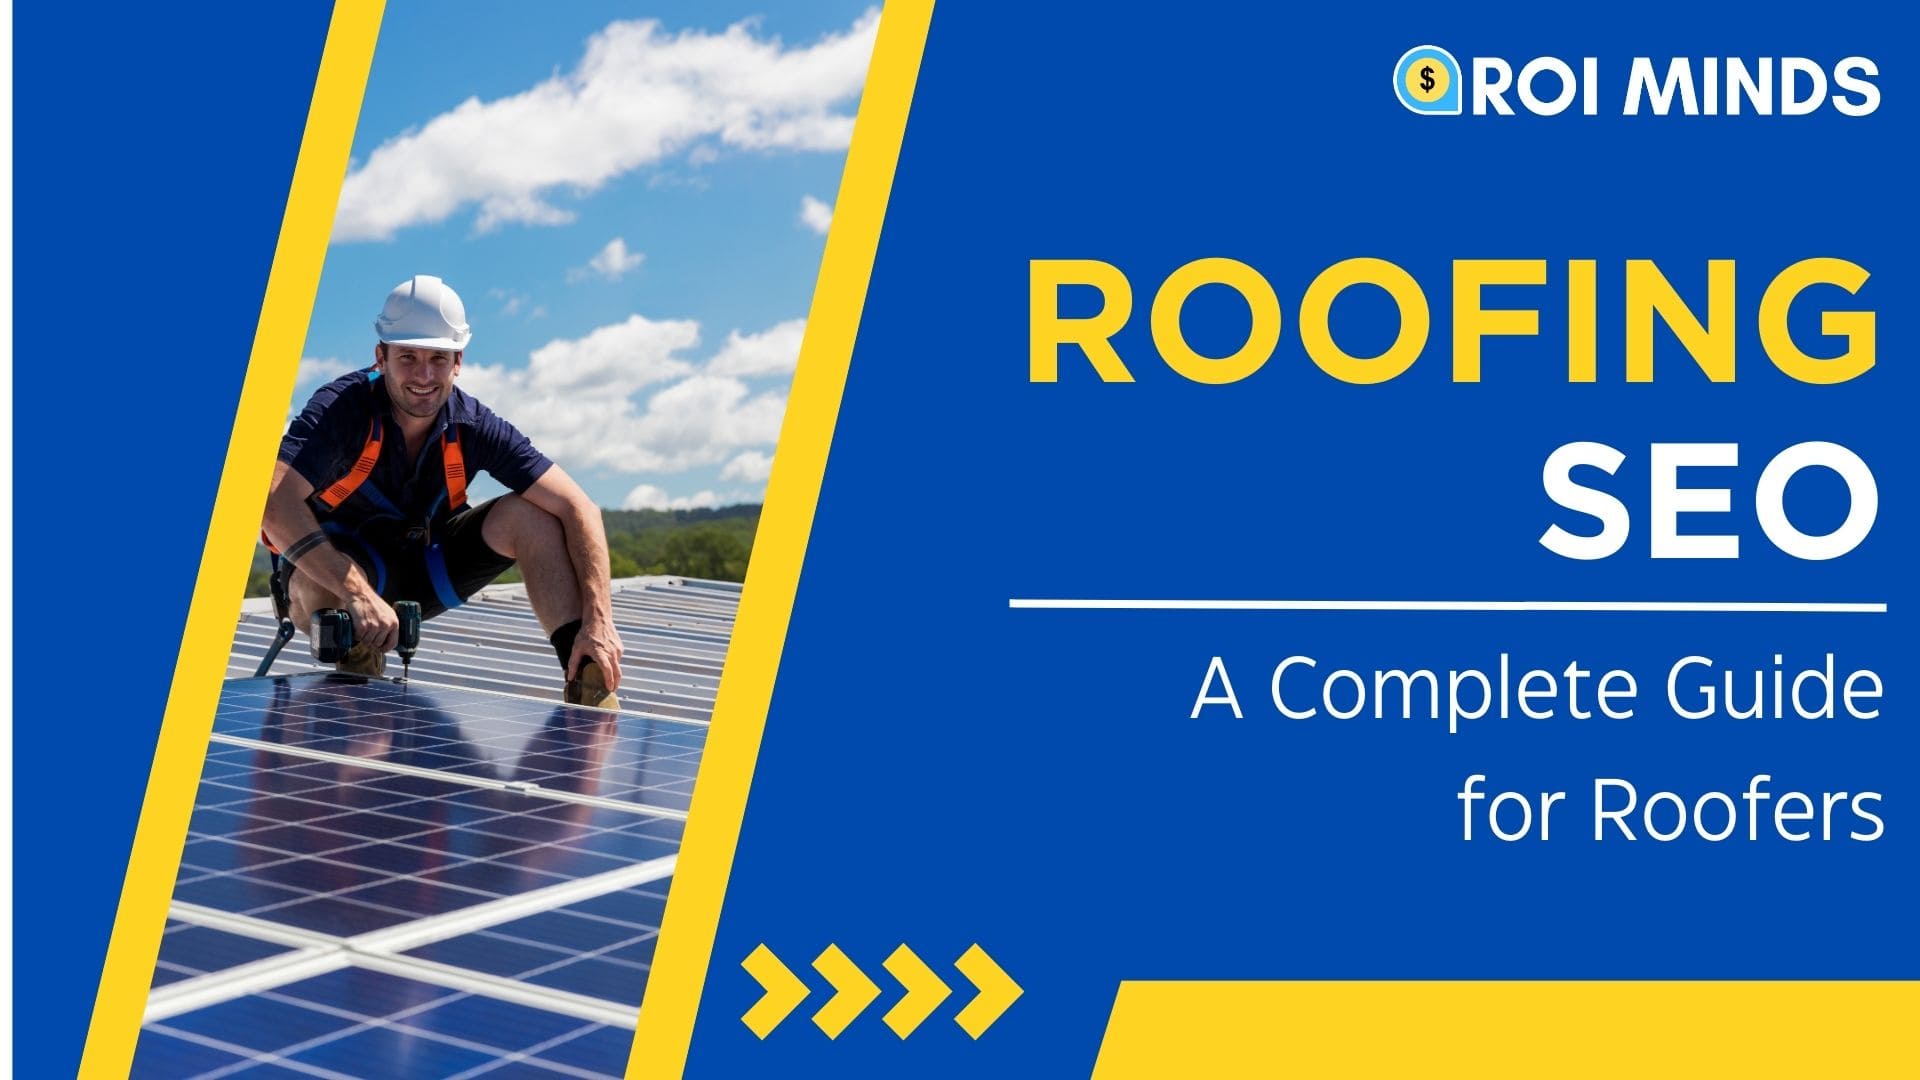 Roofing SEO: A Complete Guide for Roofers